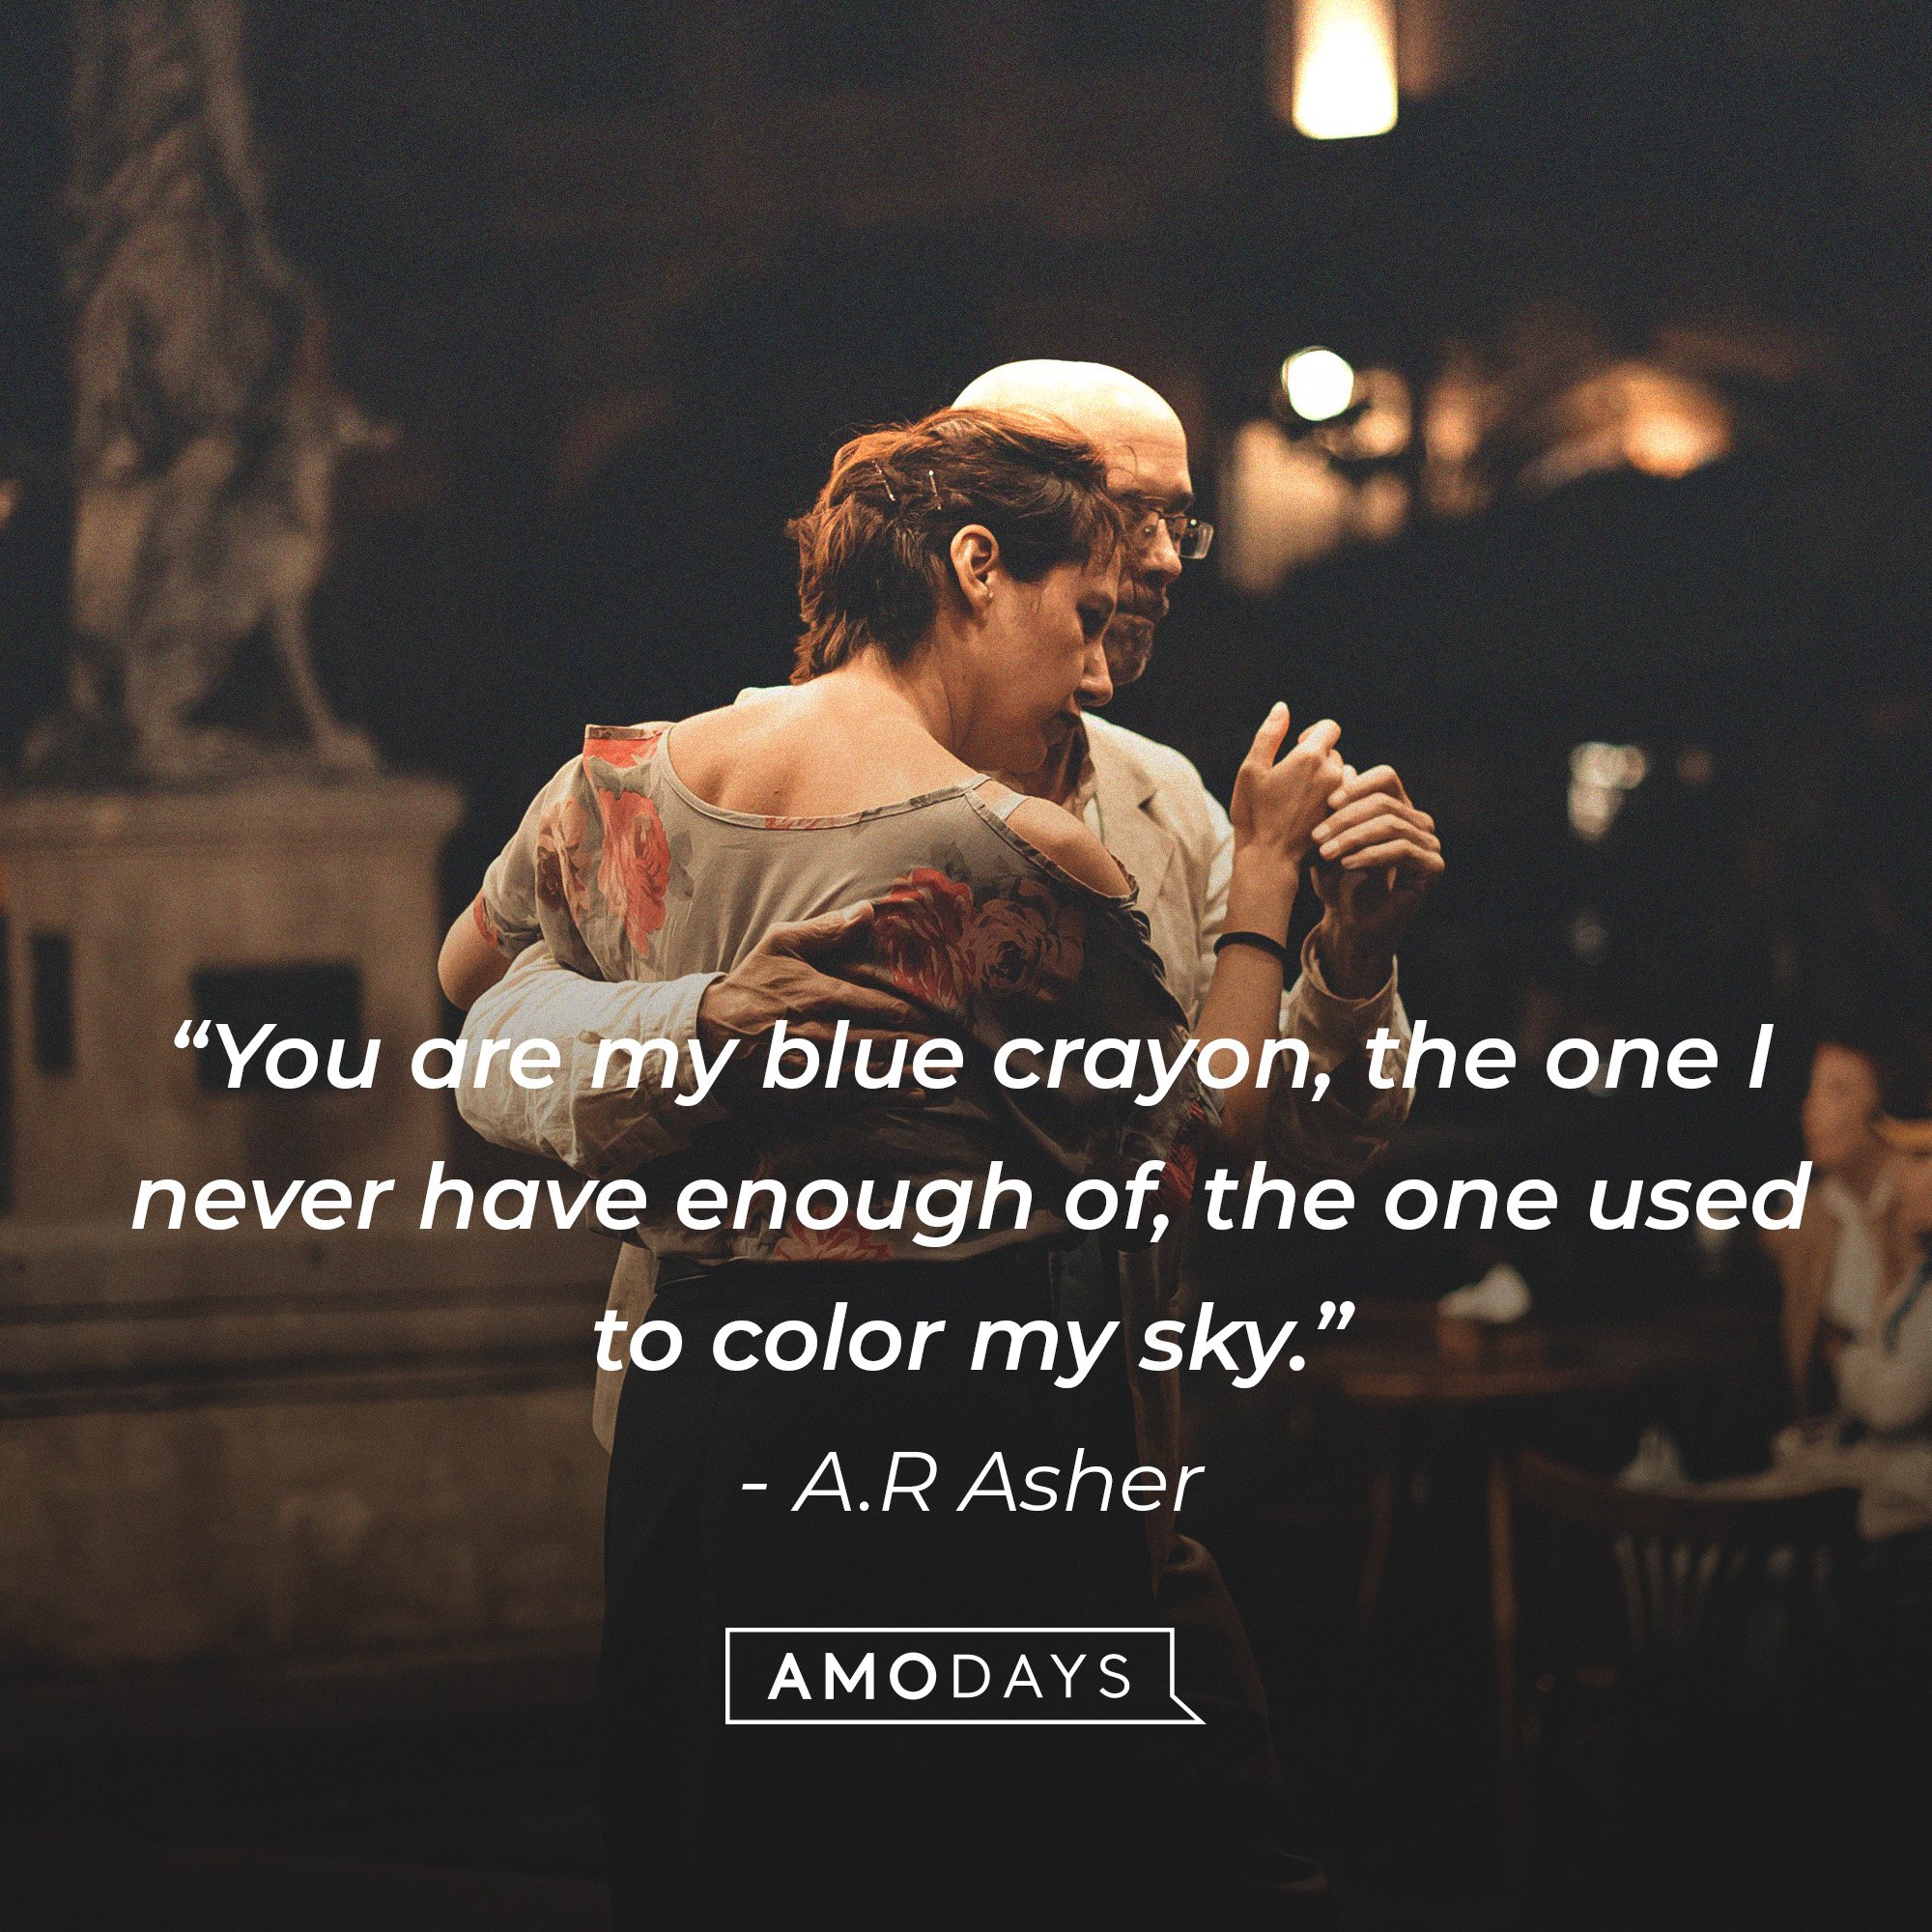  A.R Asher's quote: “You are my blue crayon, the one I never have enough of, the one used to color my sky.” | Image: AmoDays